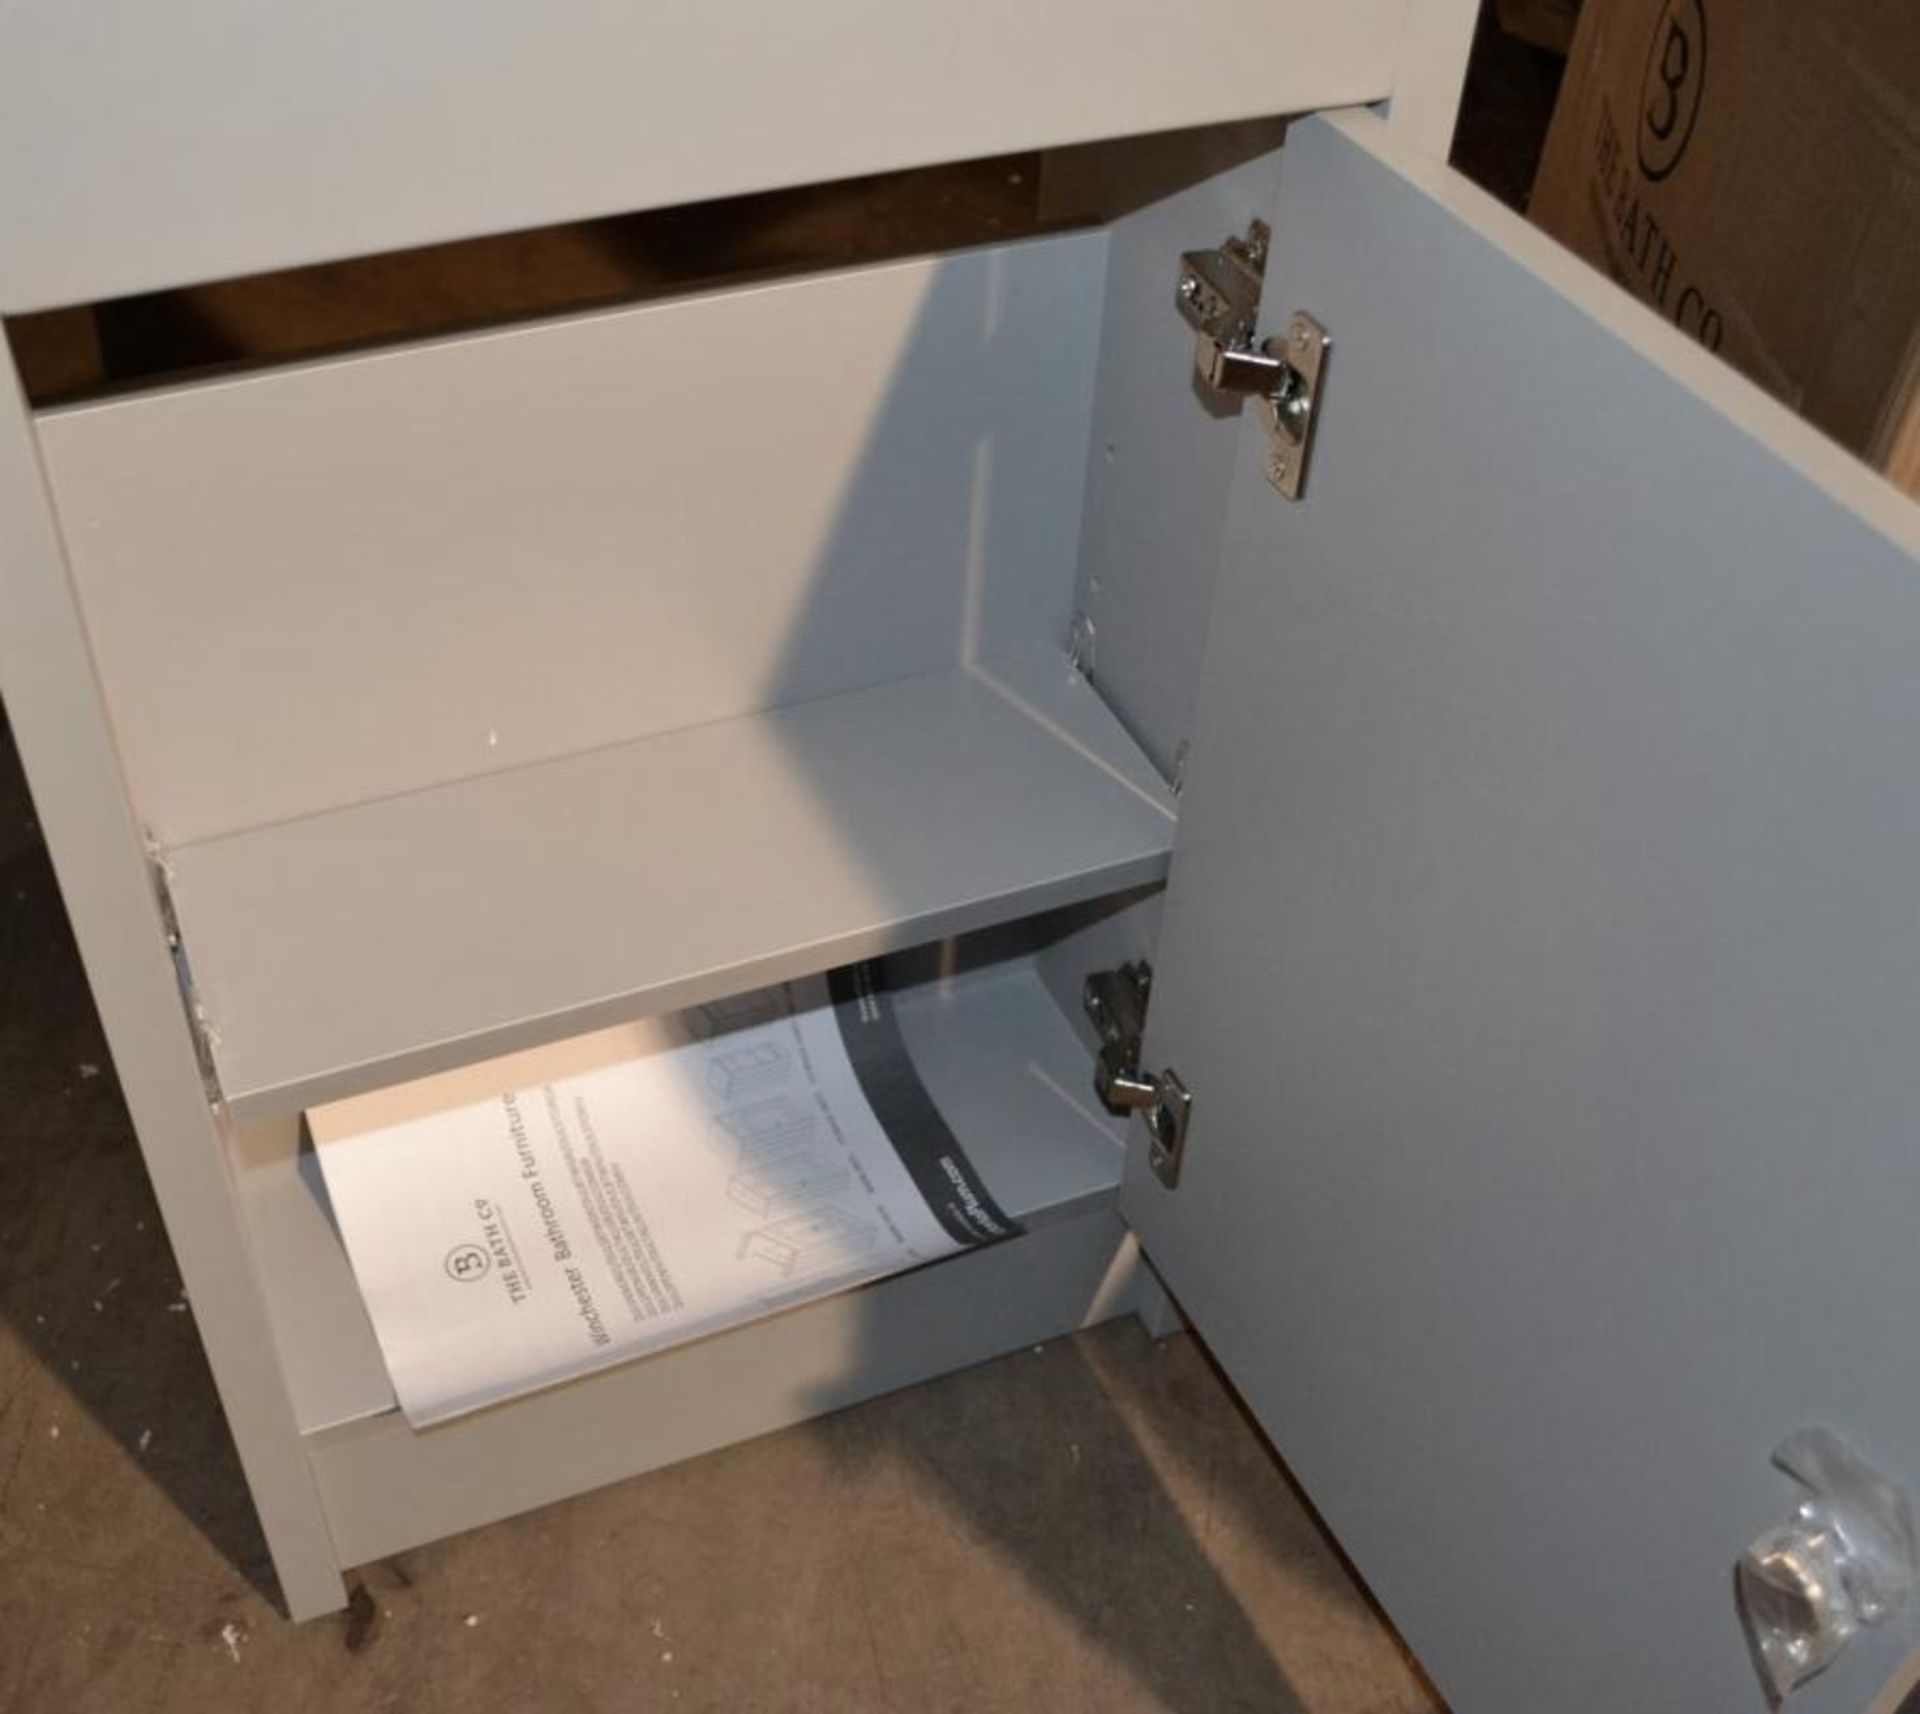 1 x Winchester Grey Cloakroom Vanity Unit In Stone Grey (DULCOMGR) - New / Unused Stock - Dimensions - Image 2 of 4